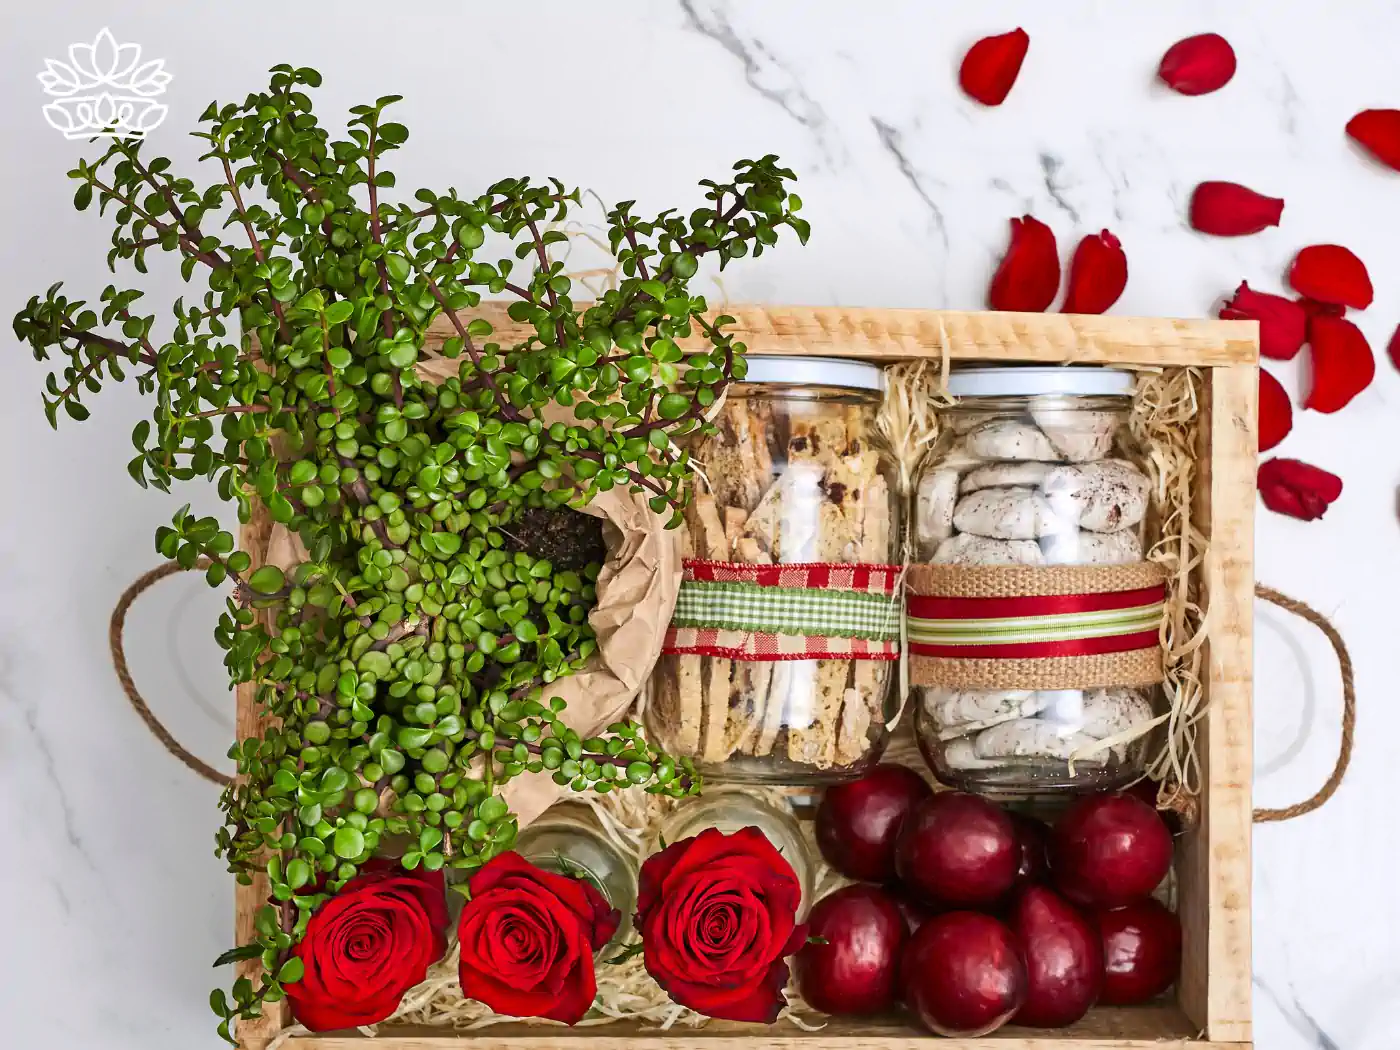 A charming housewarming gift box featuring vibrant red roses, fresh red apples, assorted homemade cookies in glass jars, and a lush green potted plant, all beautifully arranged in a rustic wooden crate. Delivered with heart, enhancing any new home. Fabulous Flowers and Gifts.